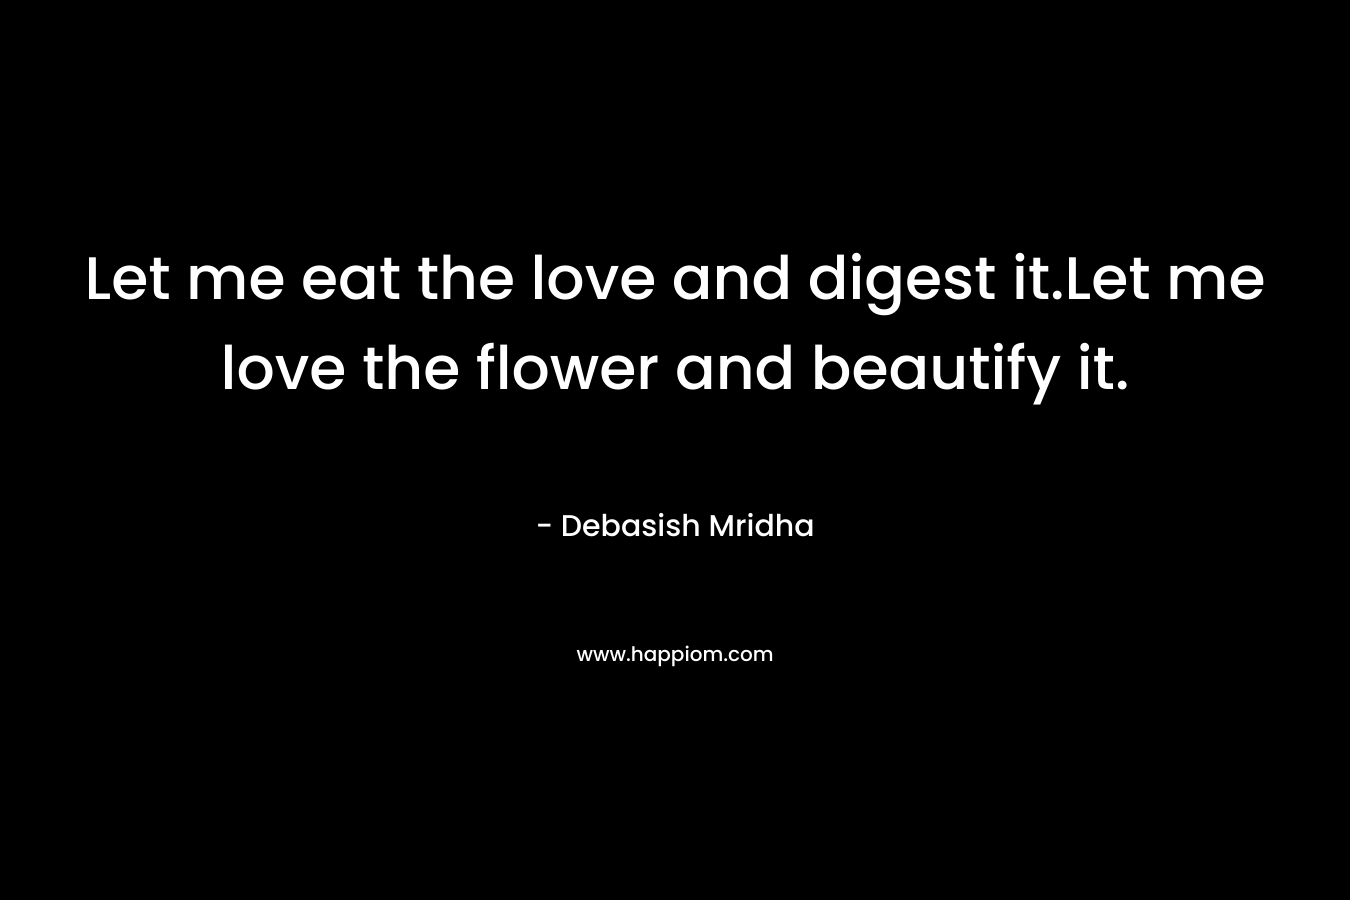 Let me eat the love and digest it.Let me love the flower and beautify it. – Debasish Mridha